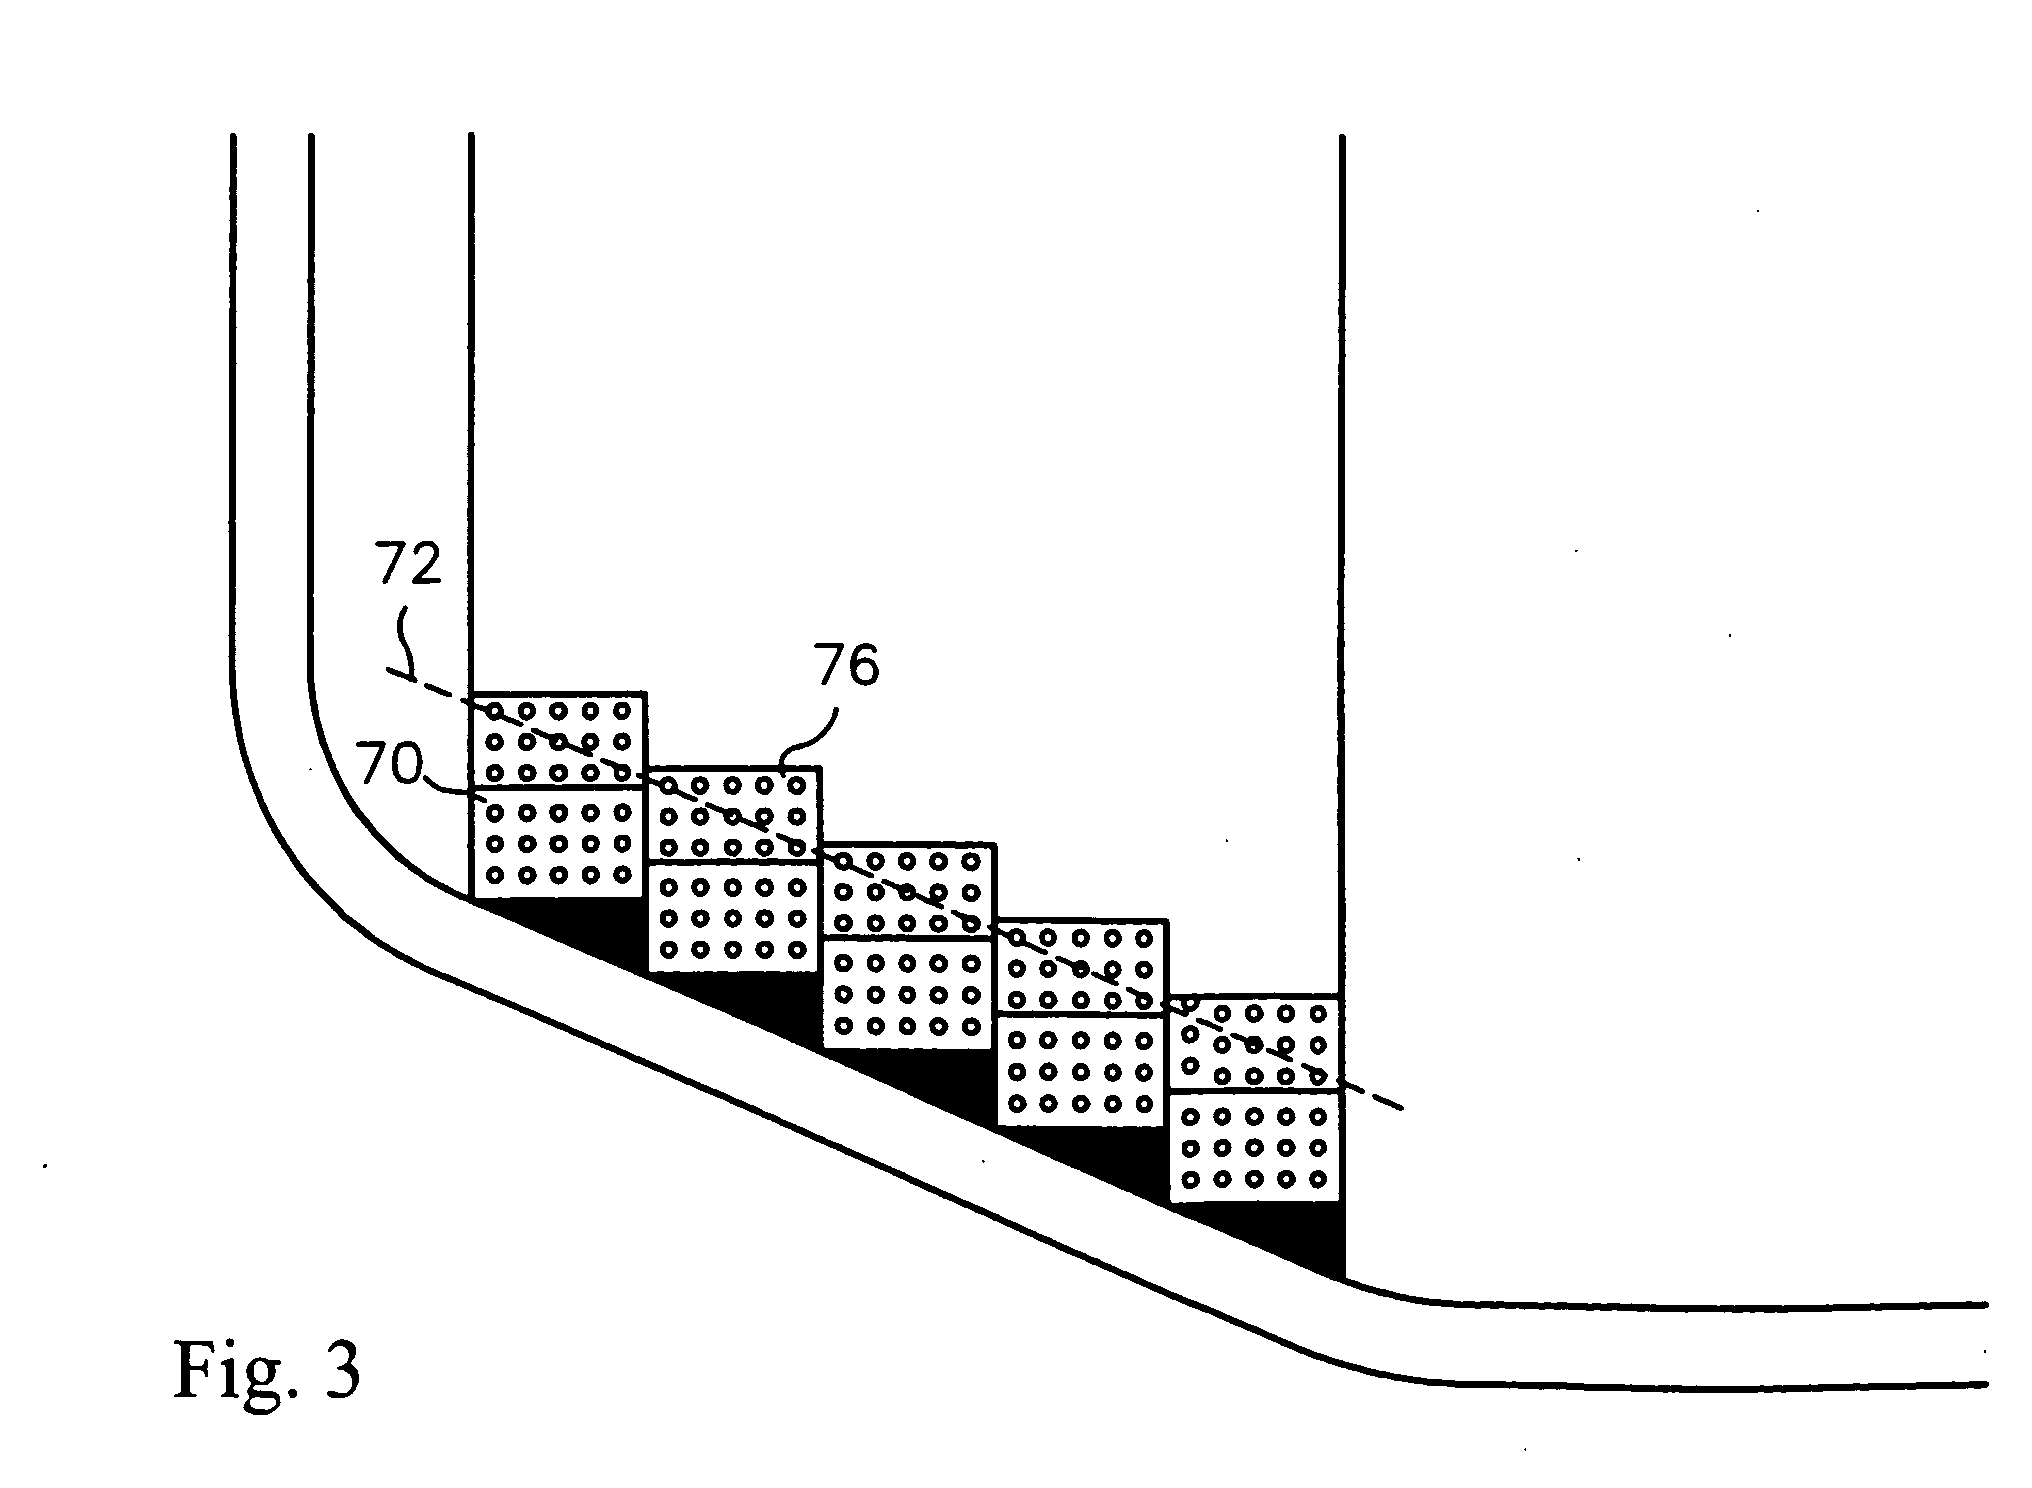 Method for providing a pre-cast detectable warning tile system